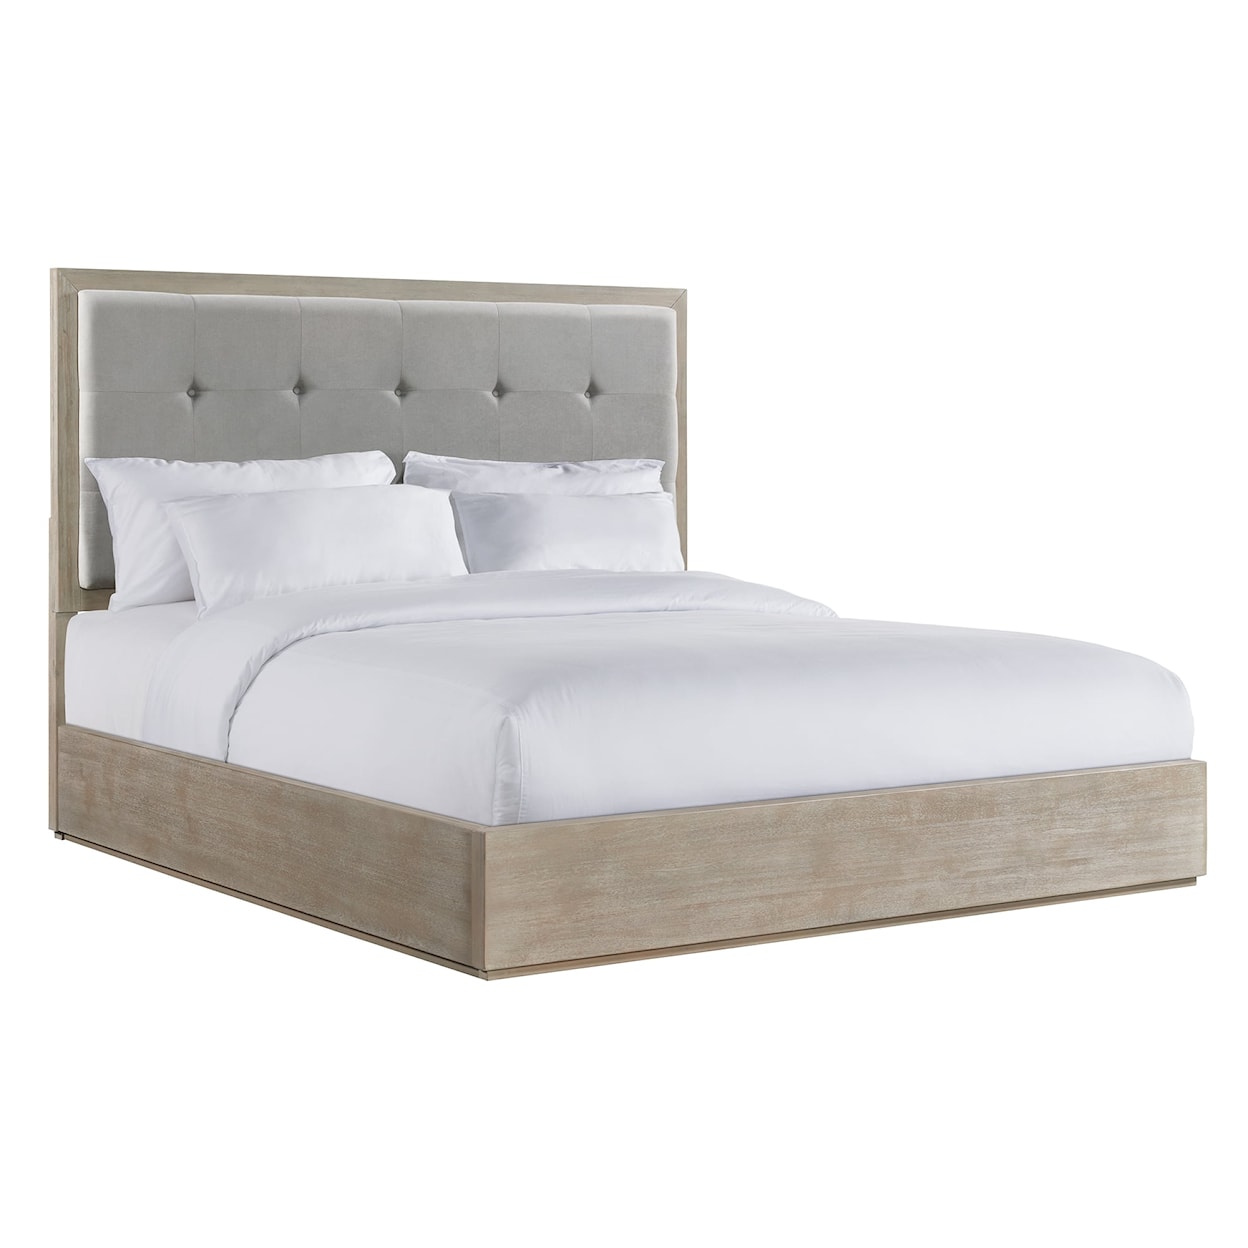 Elements International Arches ARCHES WHITE OAK KING BED |